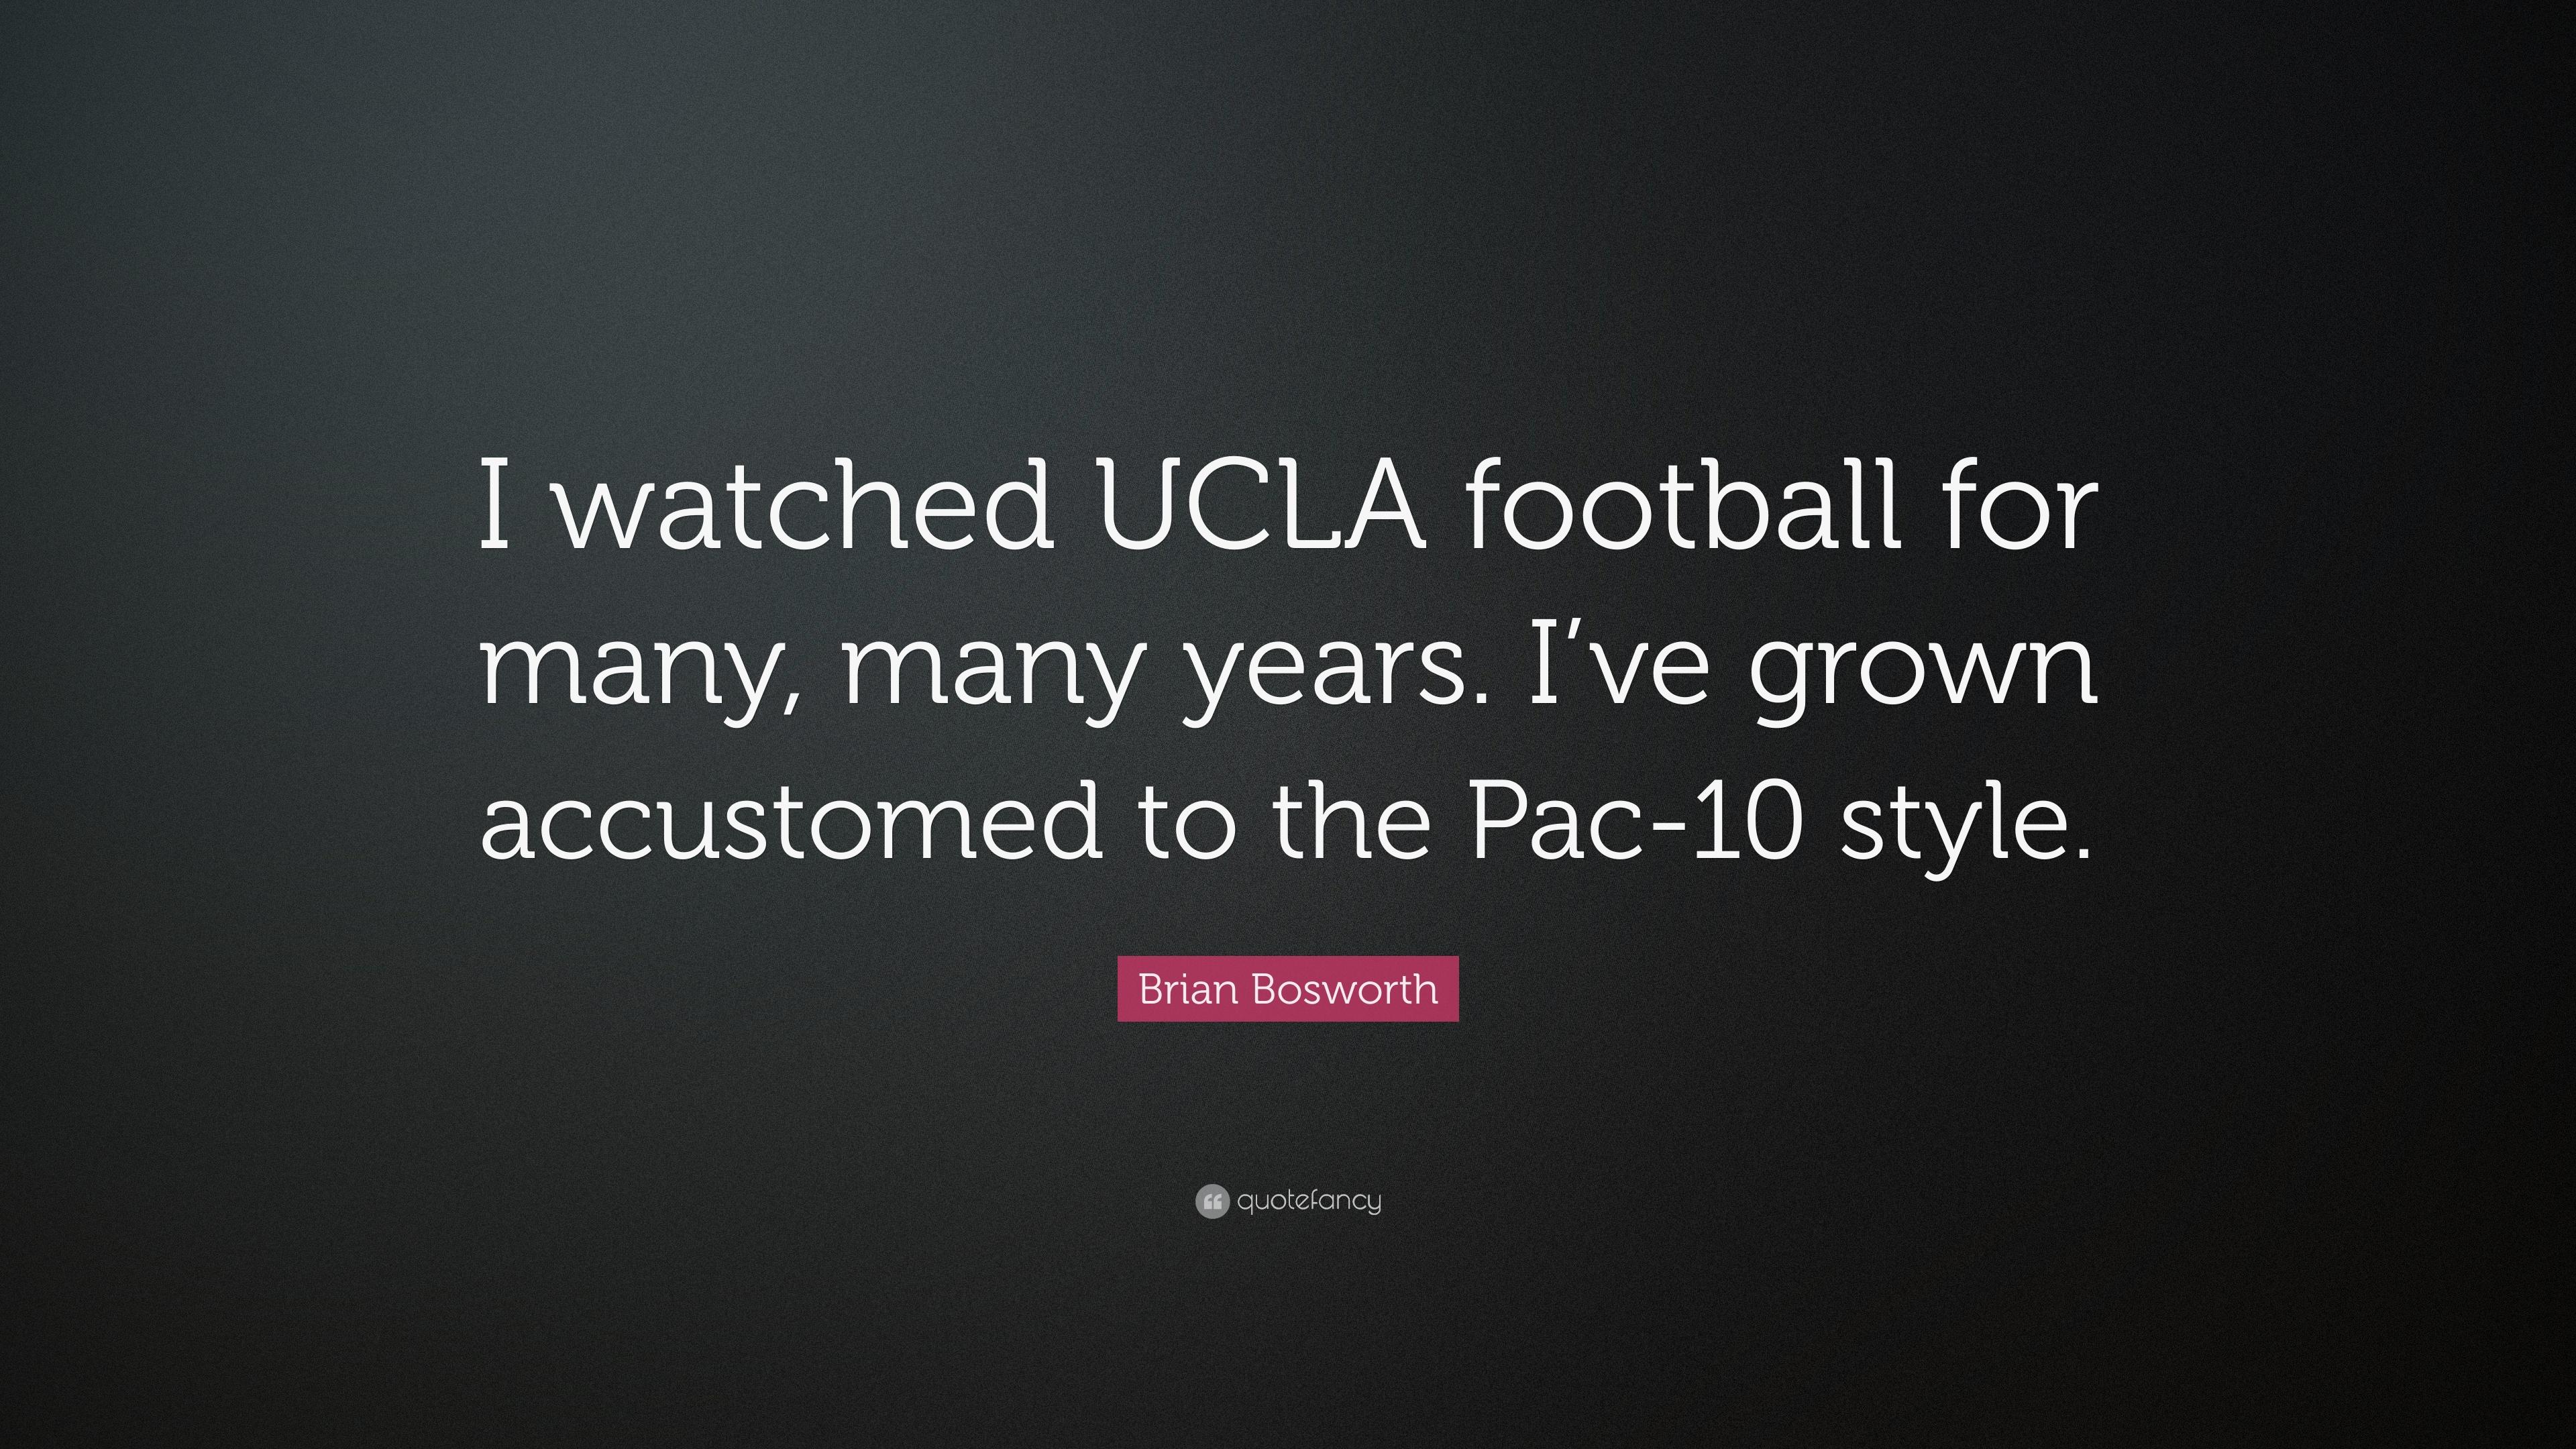 Brian Bosworth Quote: “I watched UCLA football for many, many years